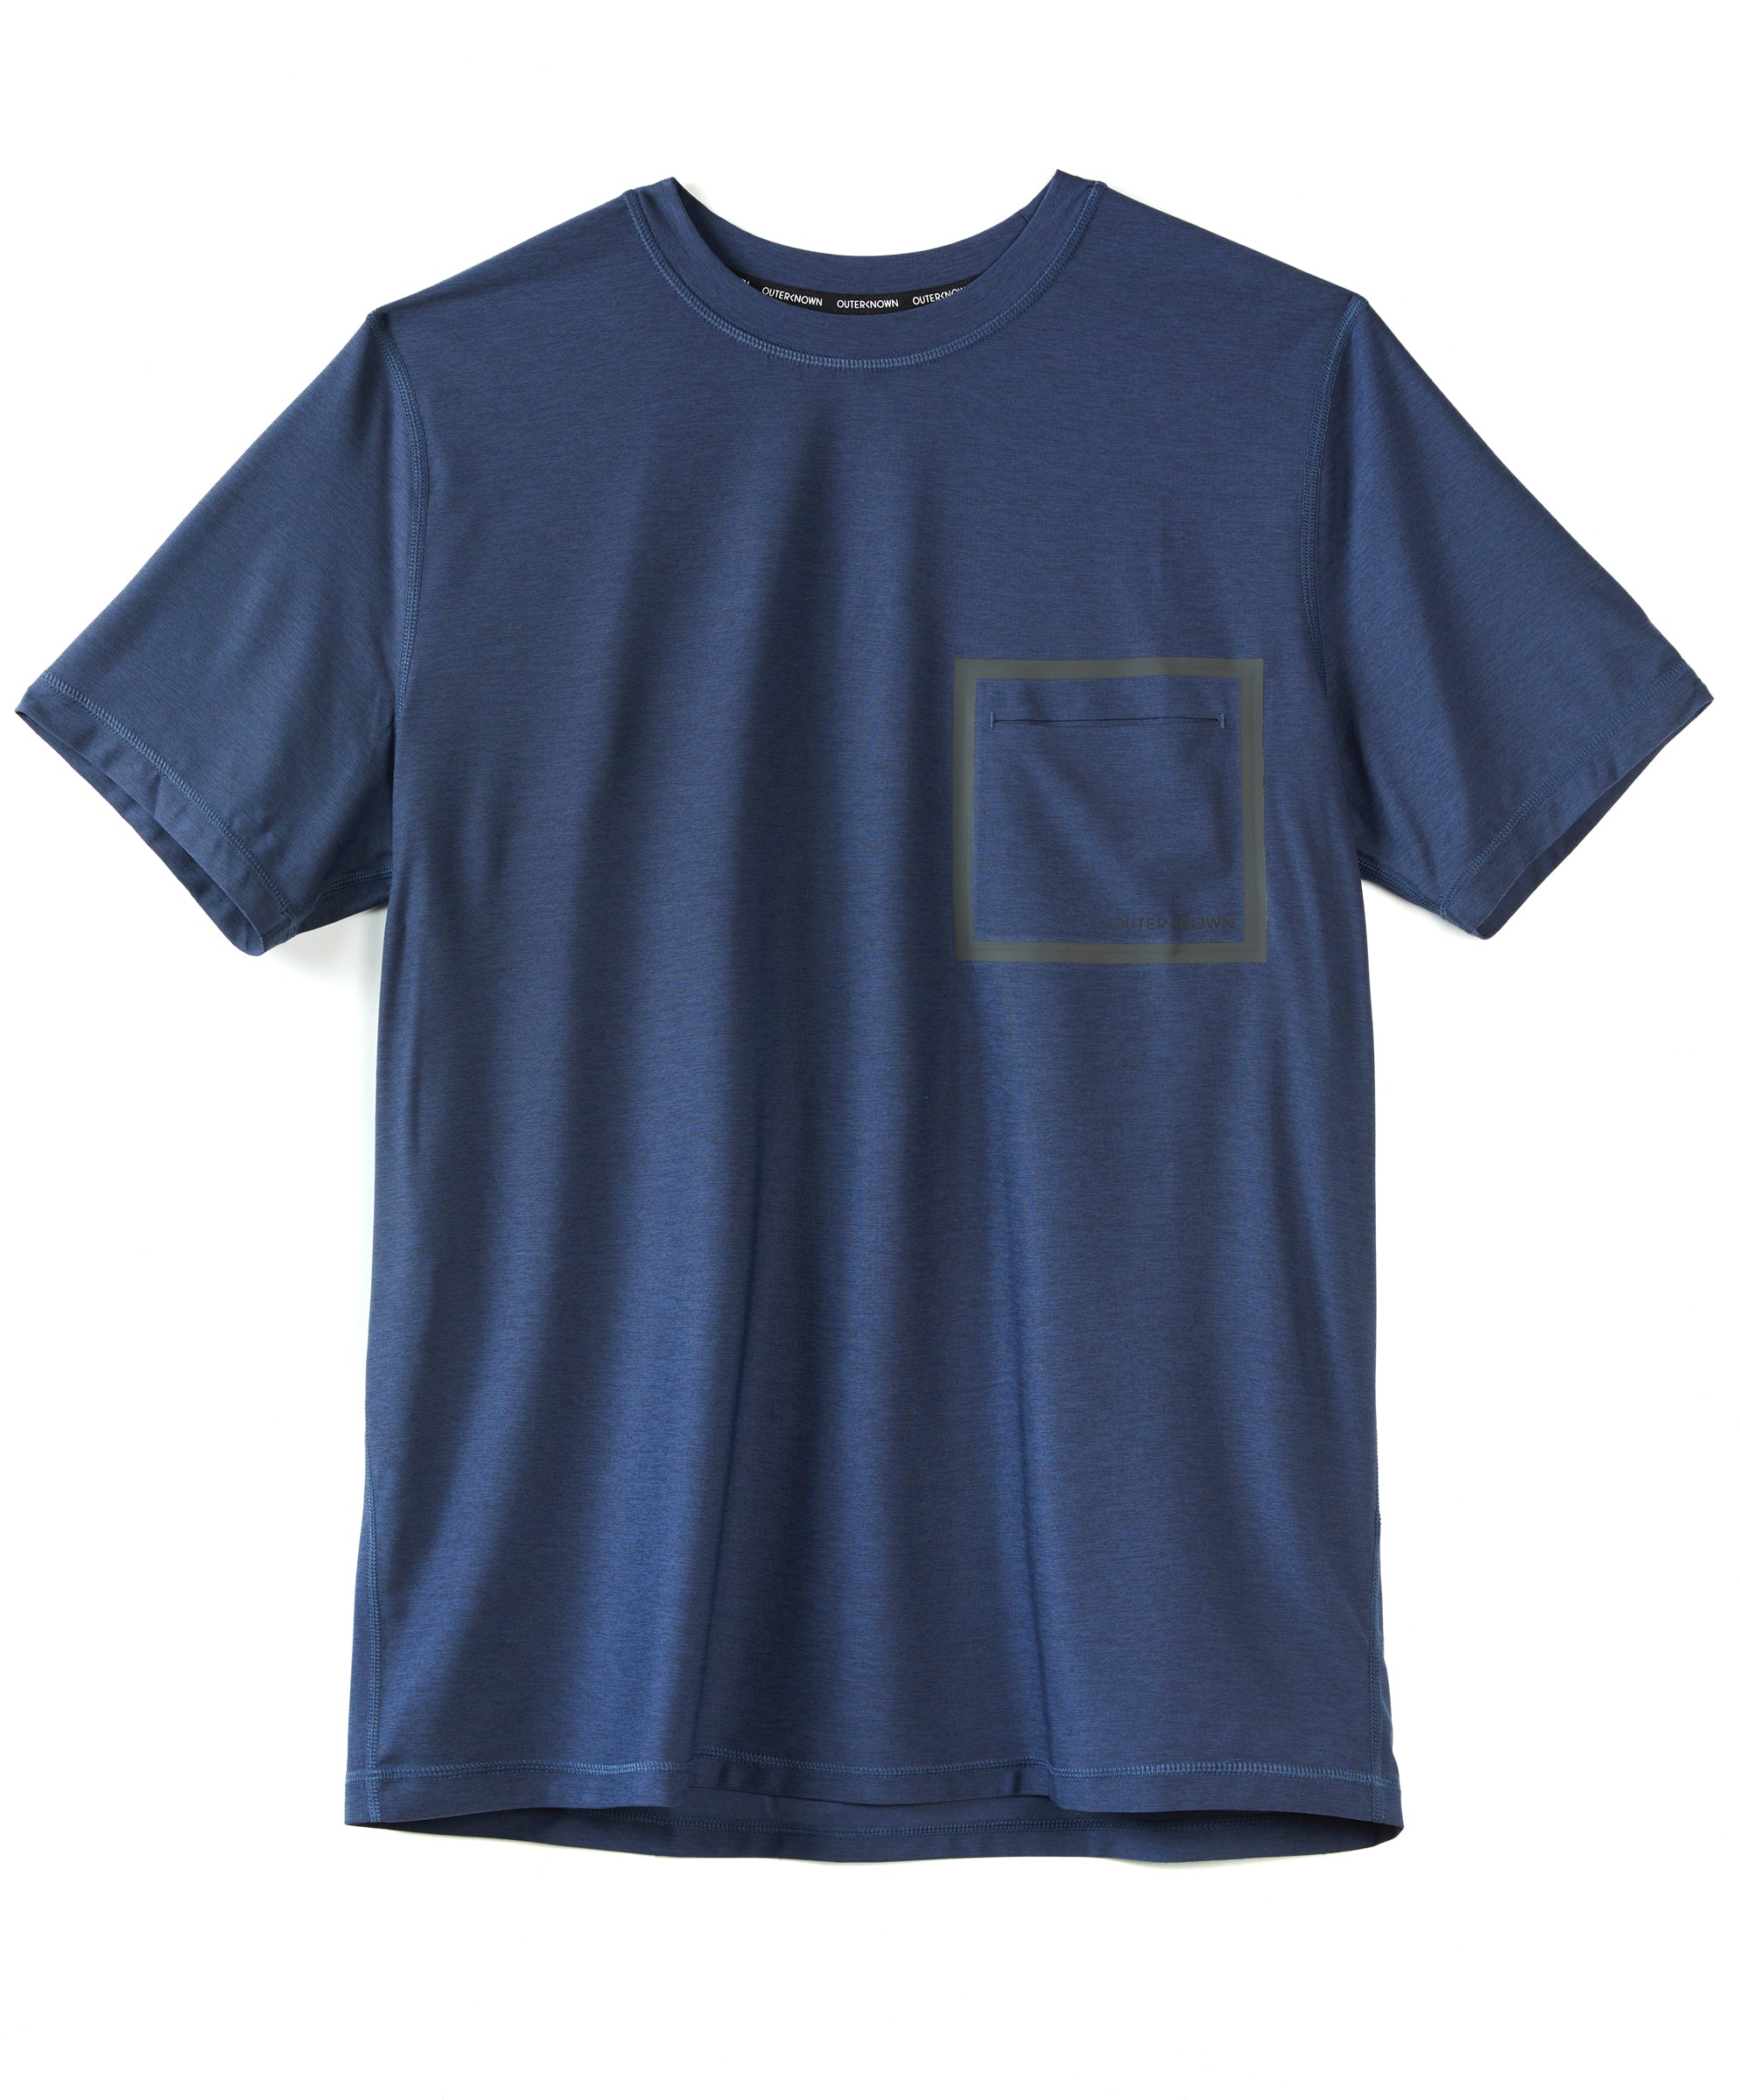 Apex S/S Tee by Kelly Slater | Men's Tees | Outerknown